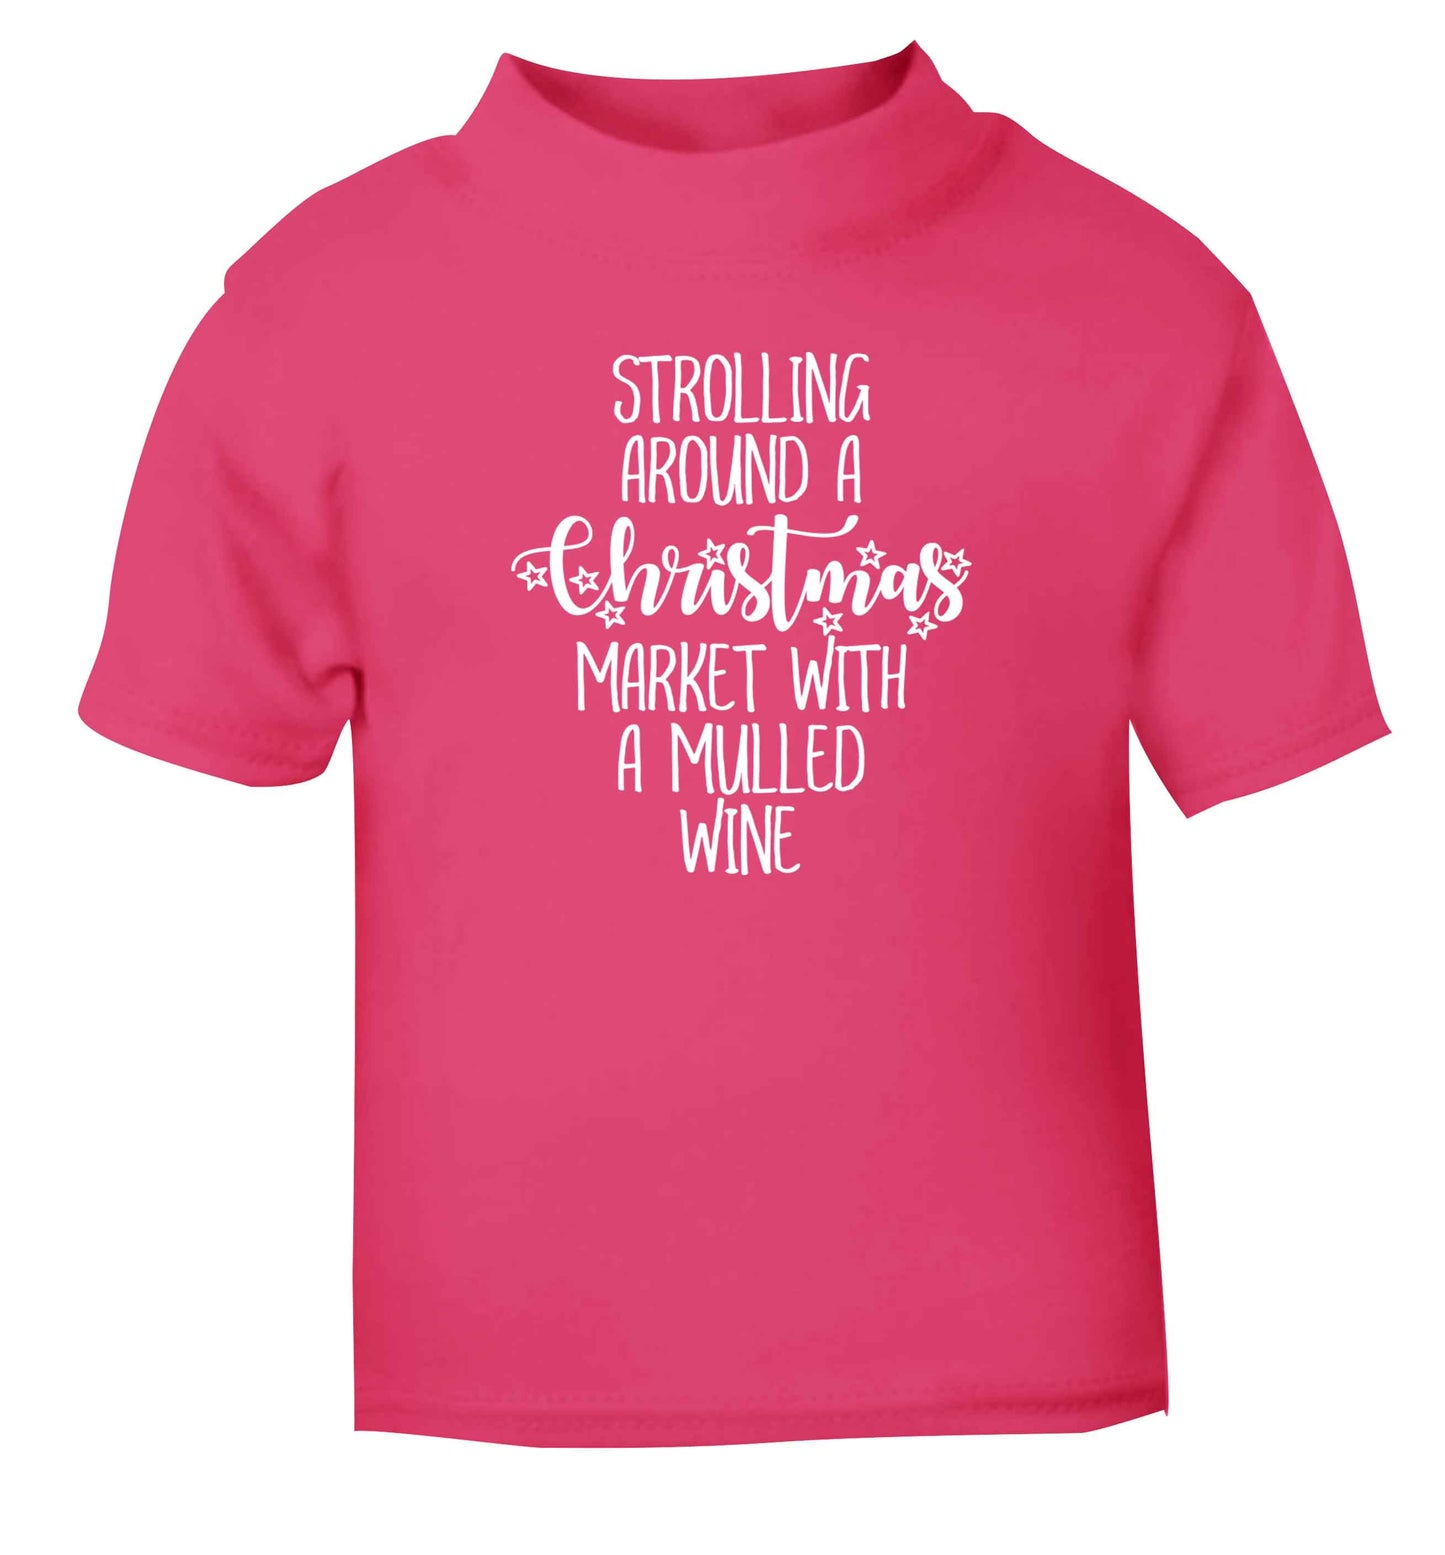 Strolling around a Christmas market with mulled wine pink Baby Toddler Tshirt 2 Years